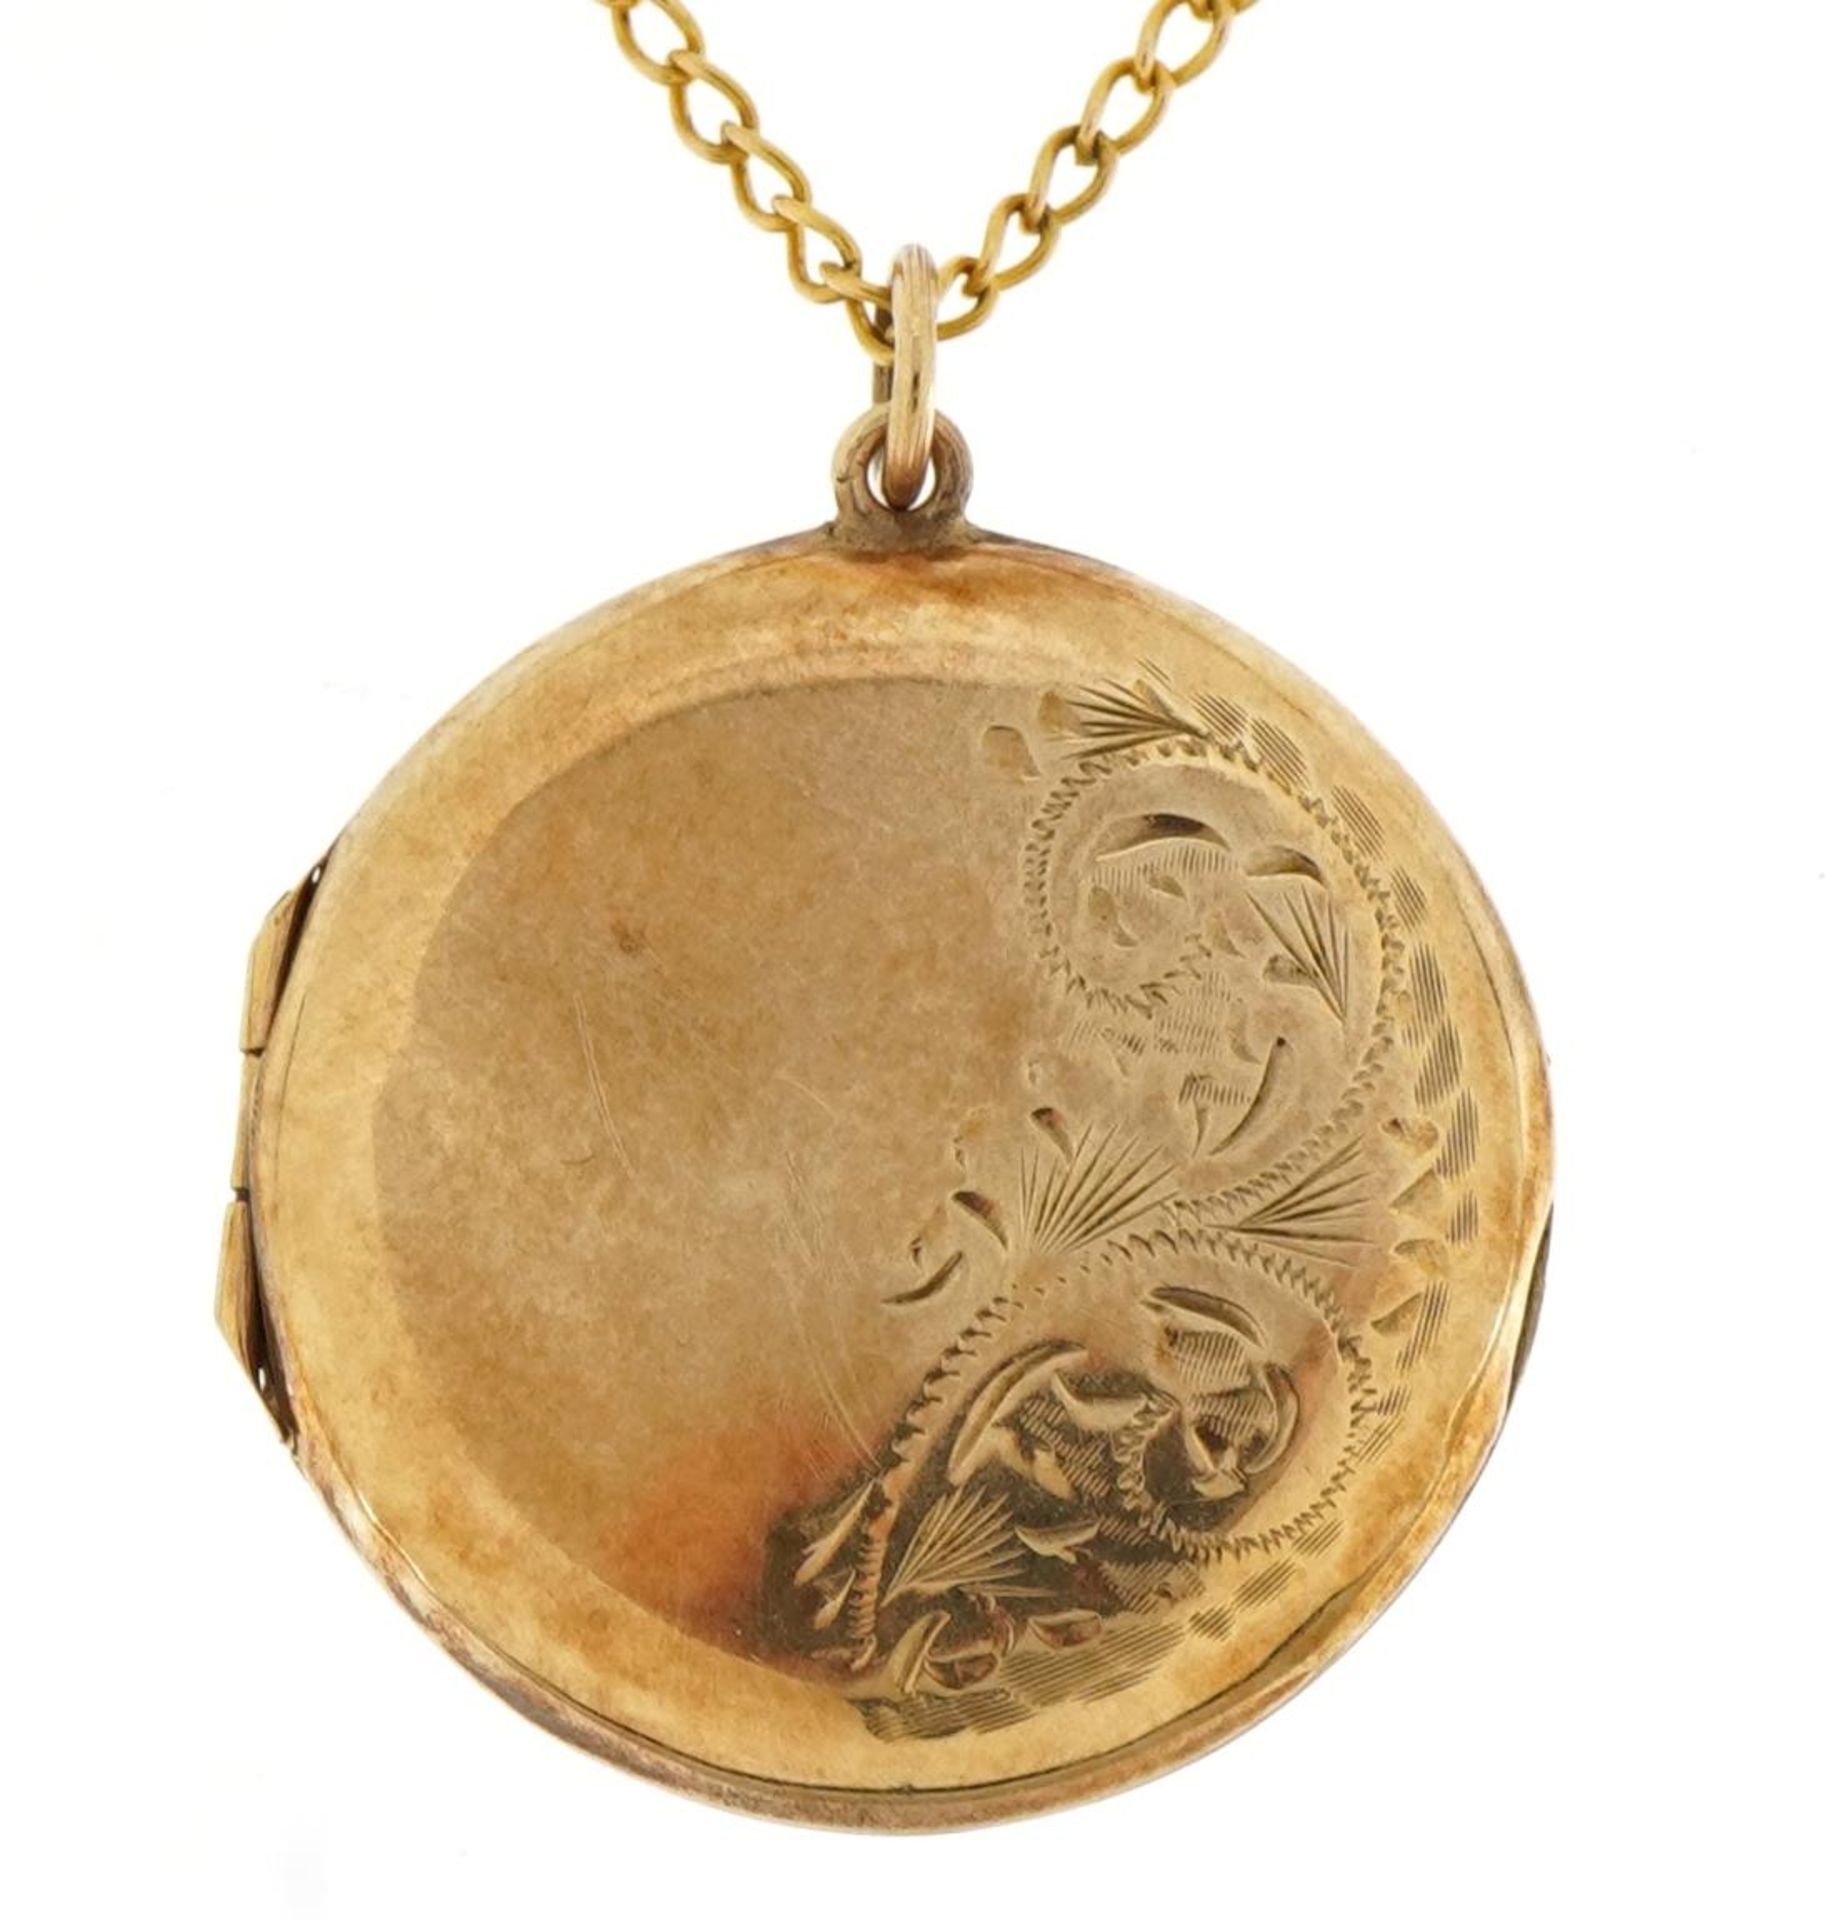 Circular 9ct gold locket with engraved decoration on a 9ct gold curb link necklace, 3.2cm high and